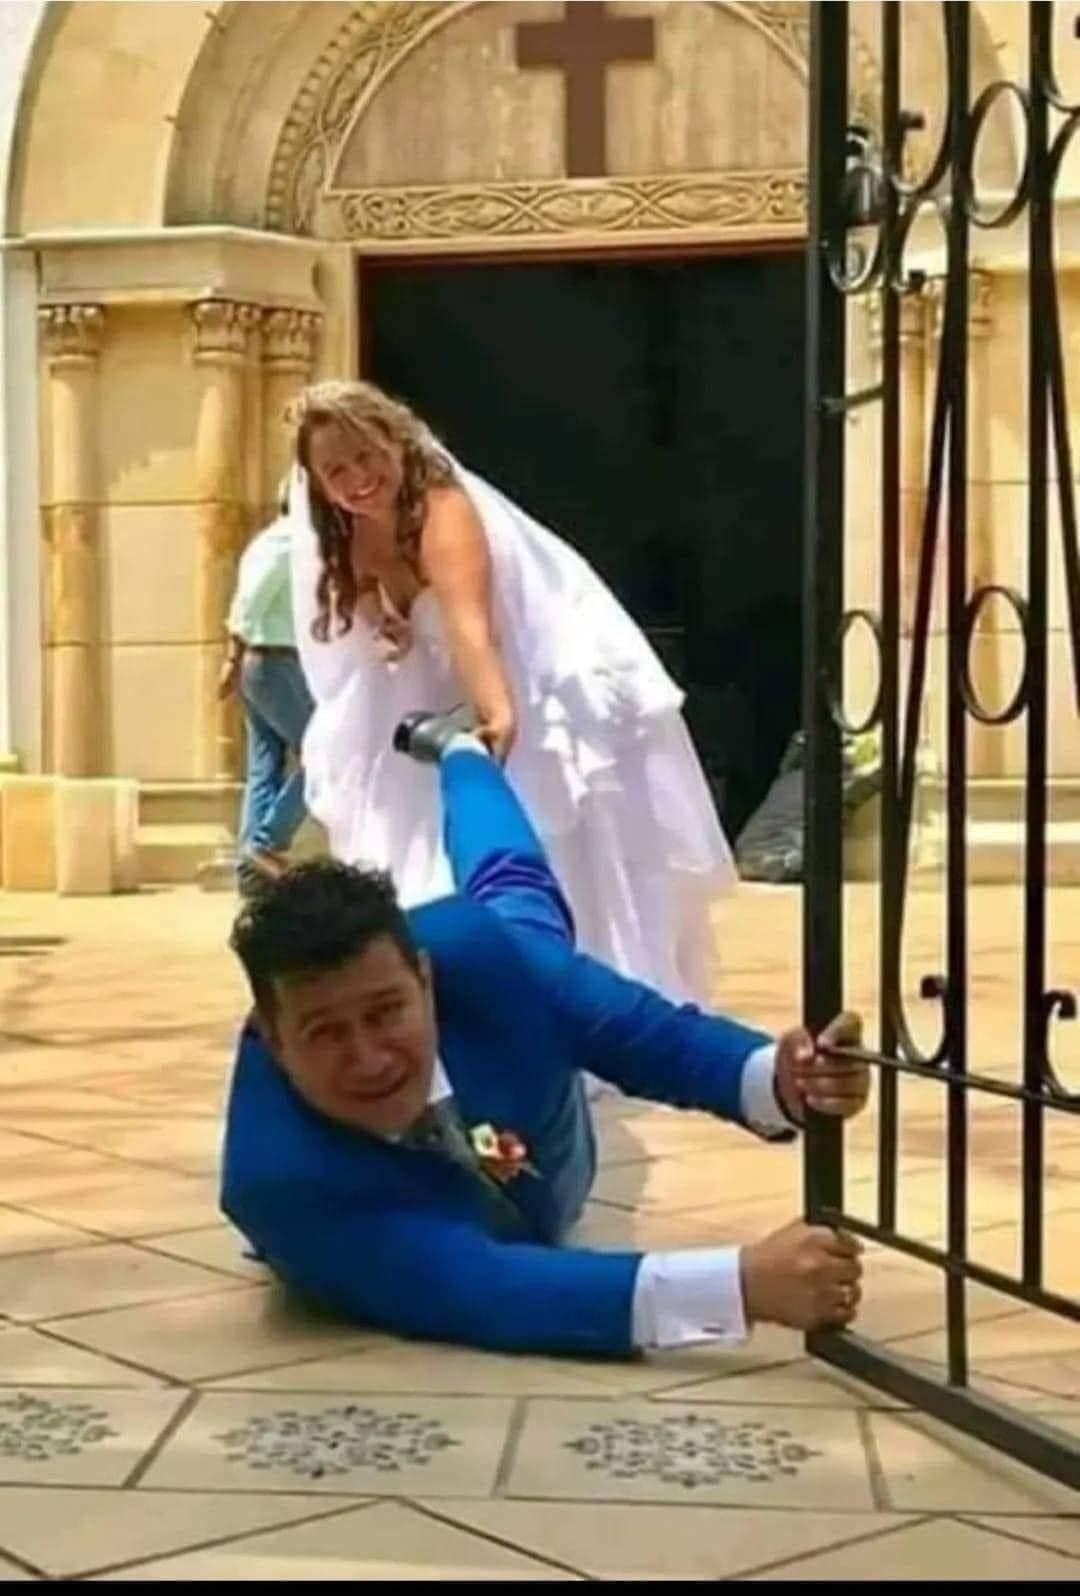 Marriage gone wrong? Blank Meme Template